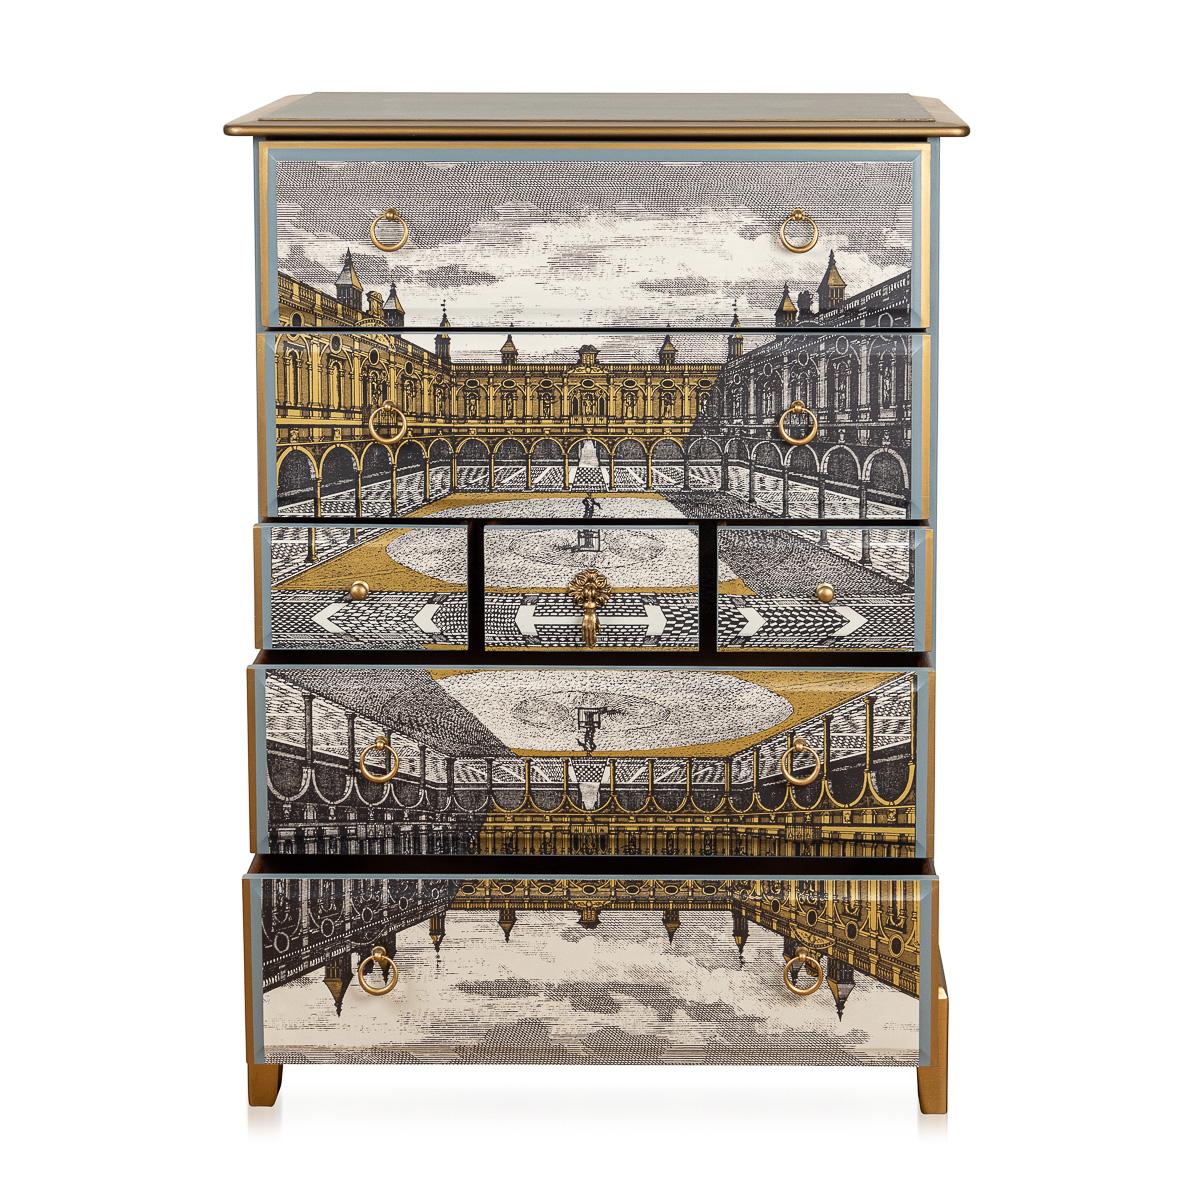 20th Century Stag Minstrel Chest Of Drawers Handpainted & Decorated With Zoffany Paper